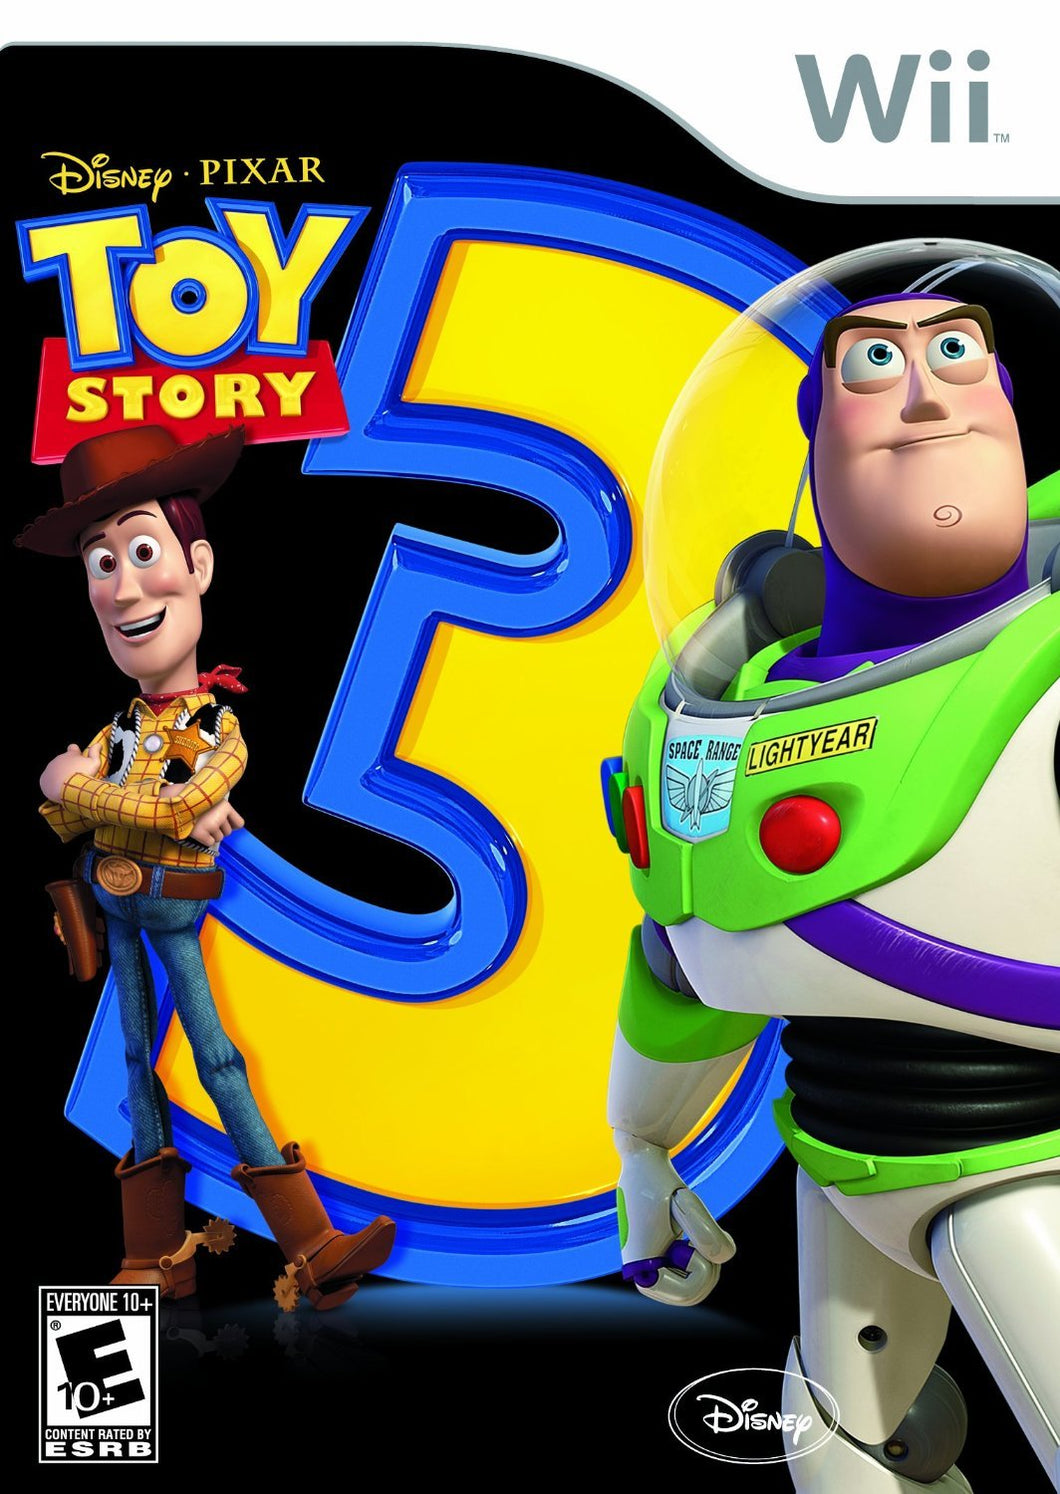 Toy Story 3 Wii